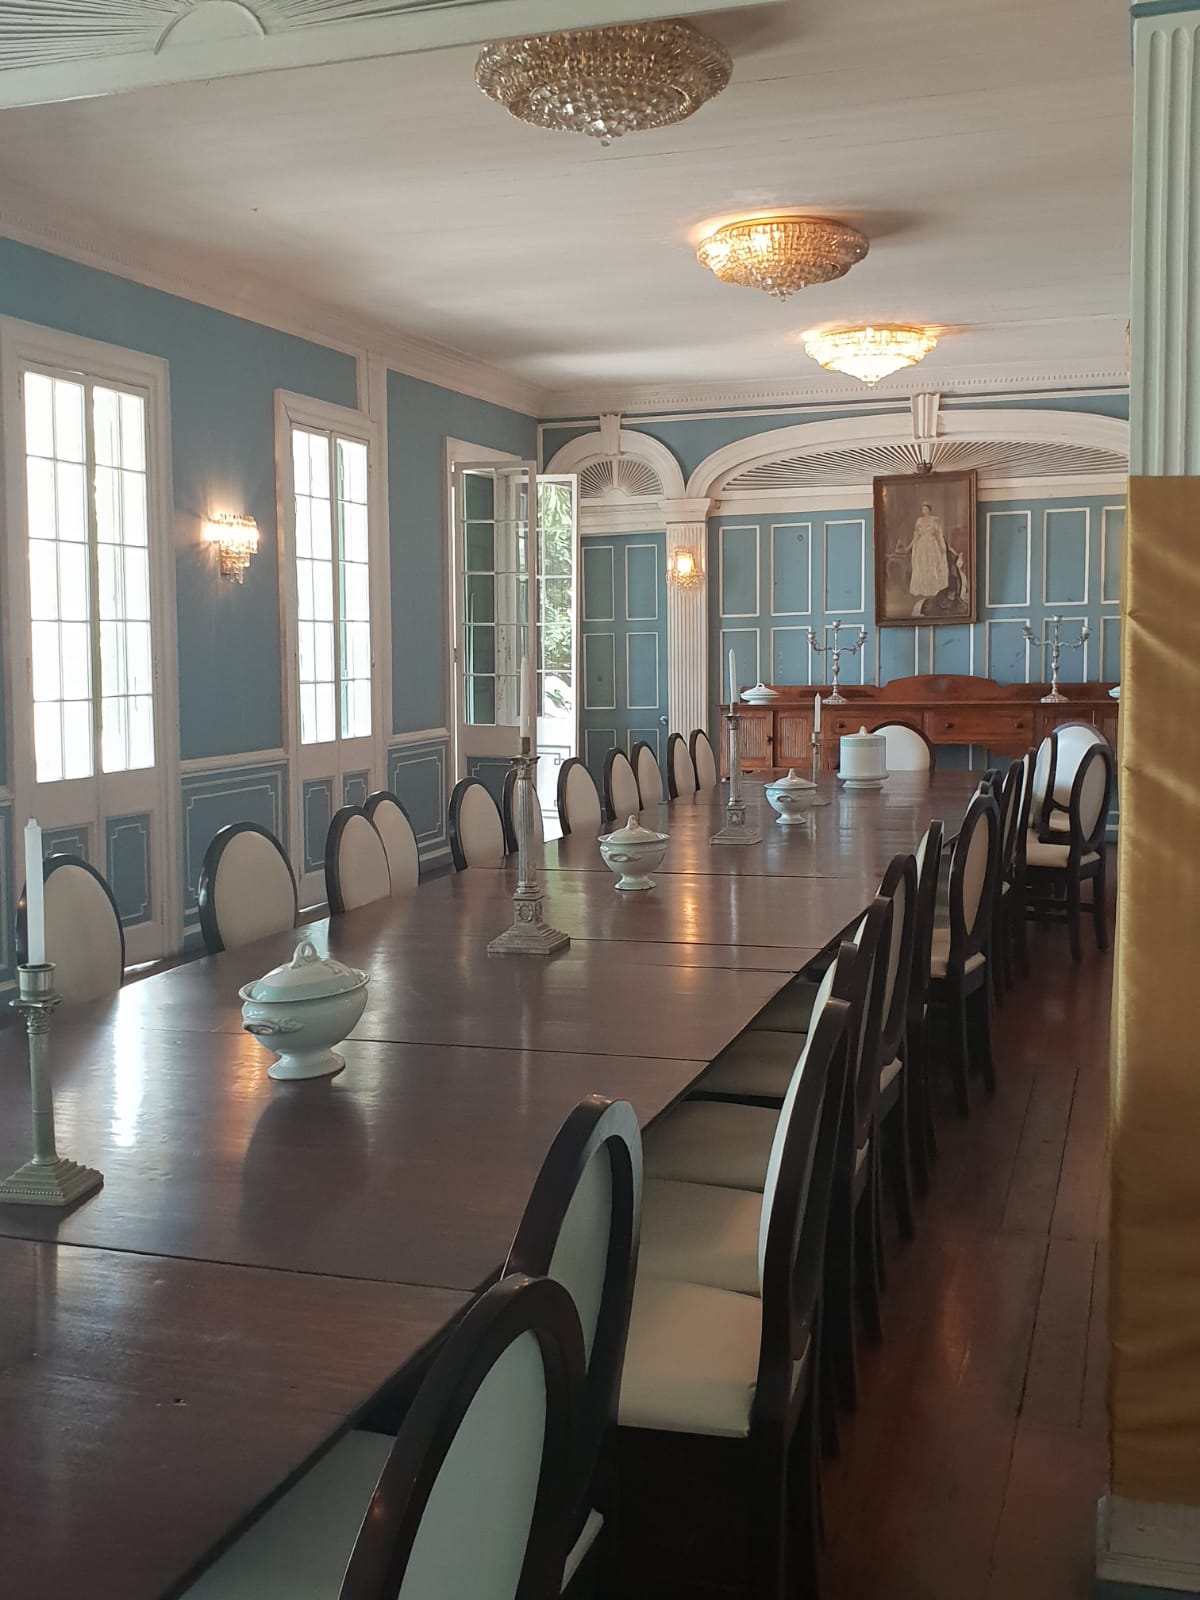 The Dining Room of the main building decorated with ceramic and porcelain wares with the Government House’s monogram